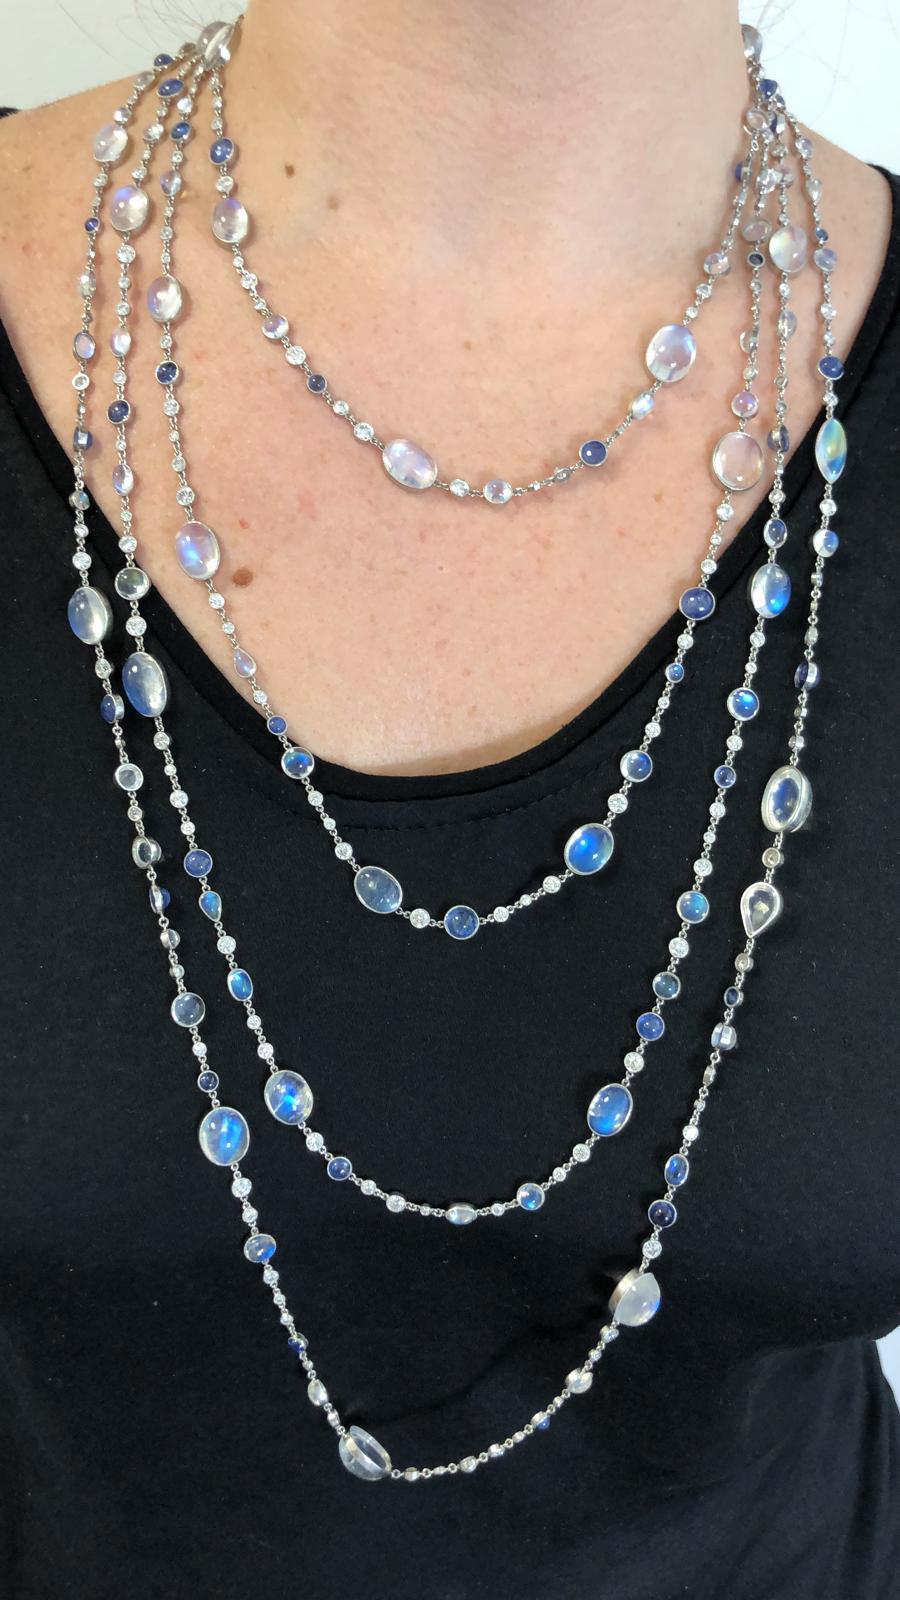 Transparent moonstone oval cabochons of exceptional adularescence are the focal point of this stunning long necklace. Tones of color are heightened by cornflower and ceylon blue round cabochon sapphires. In addition, faceted round brilliant cut